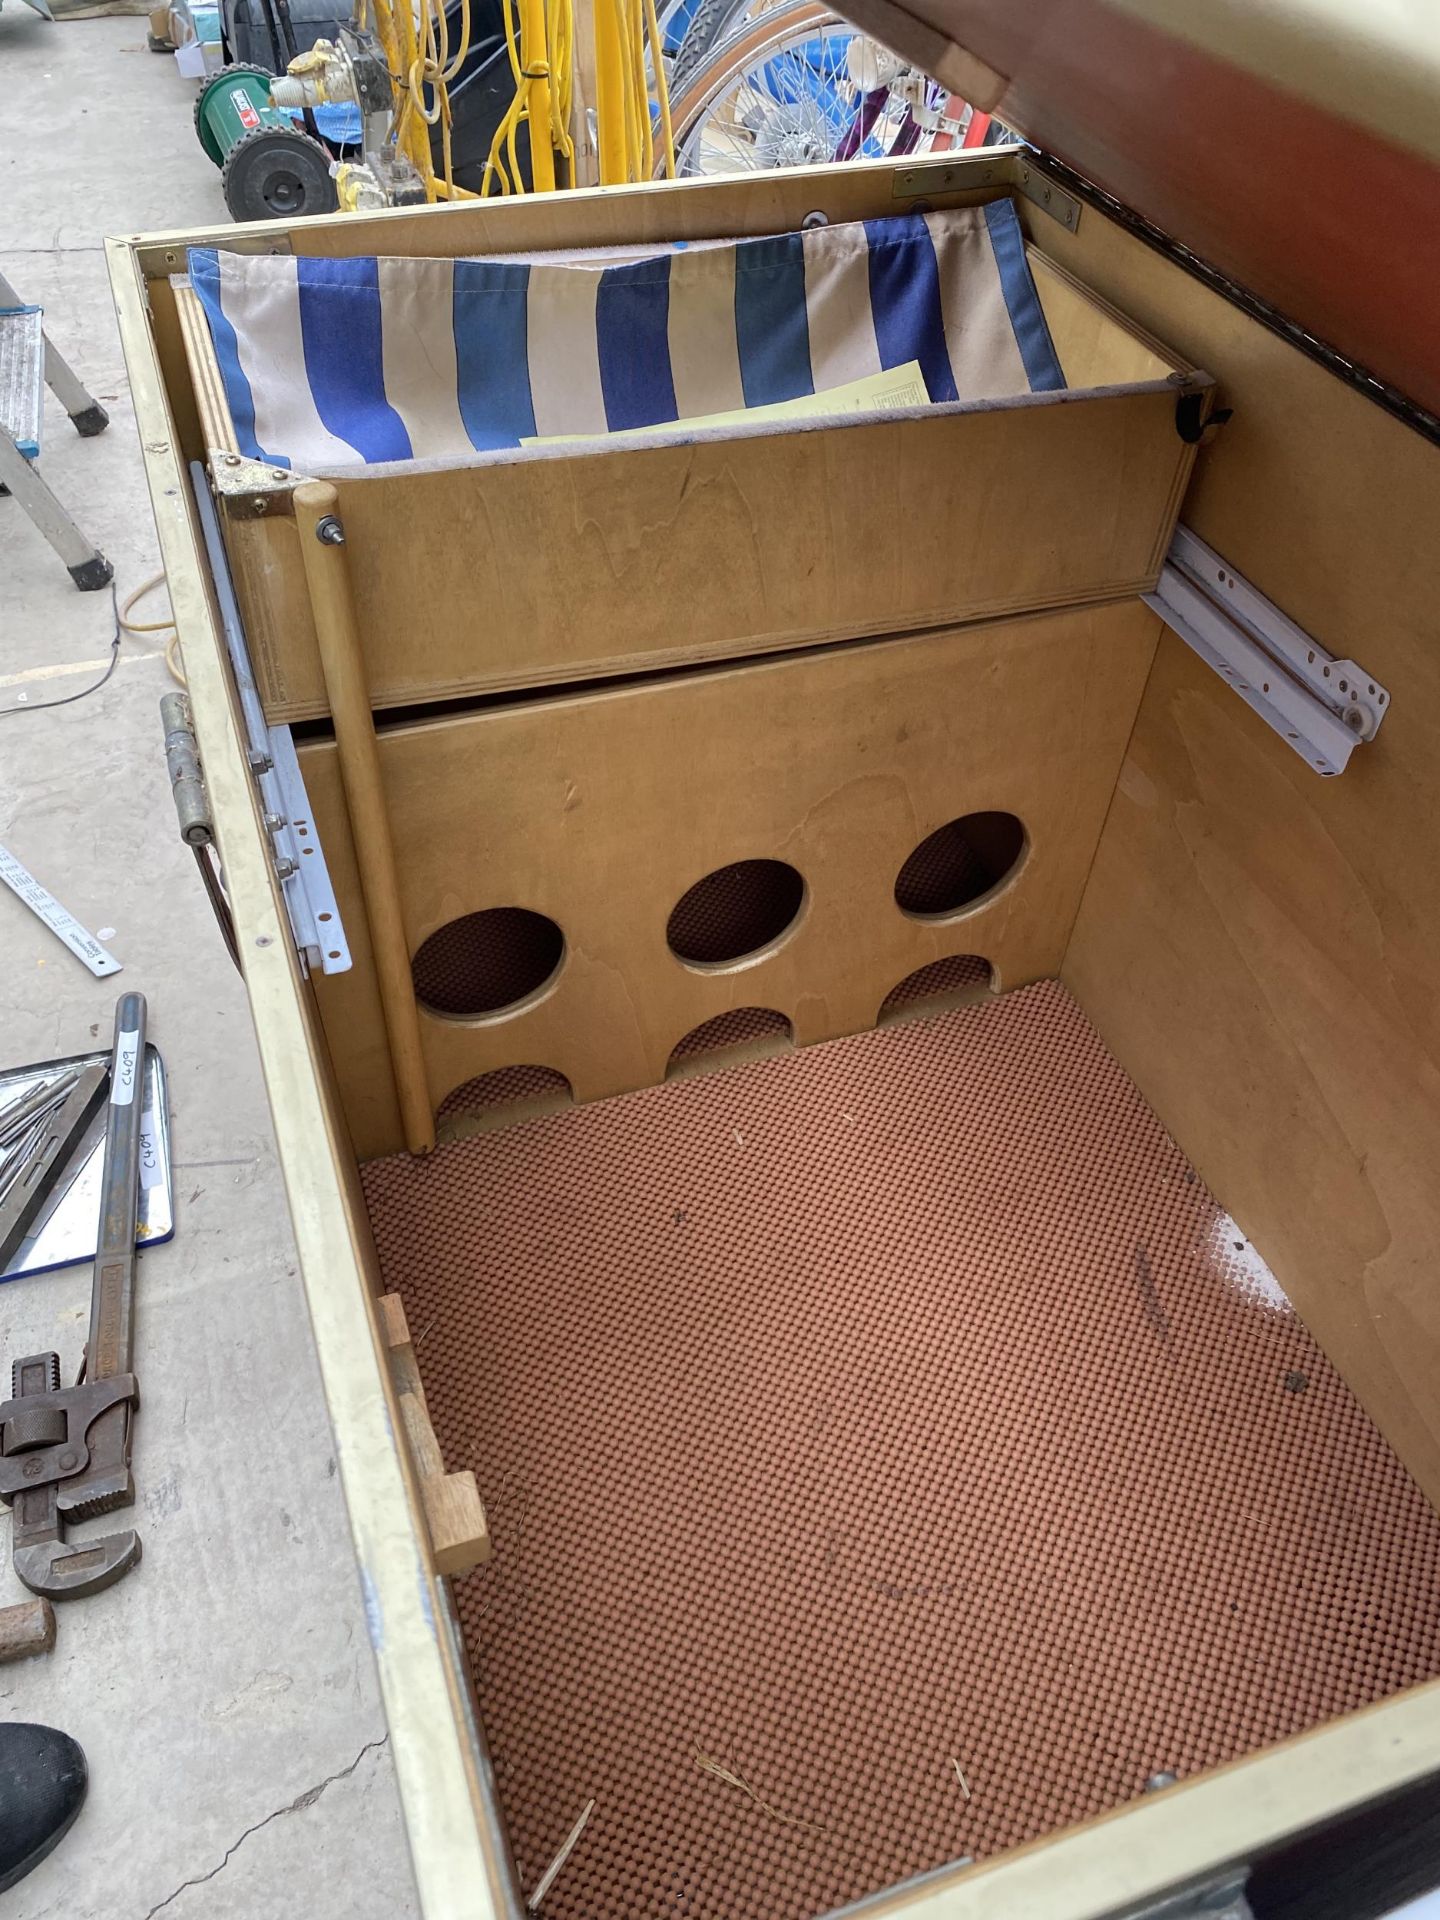 A LARGE HARD CASED FOUR WHEELED STORAGE TROLLEY - Image 4 of 4